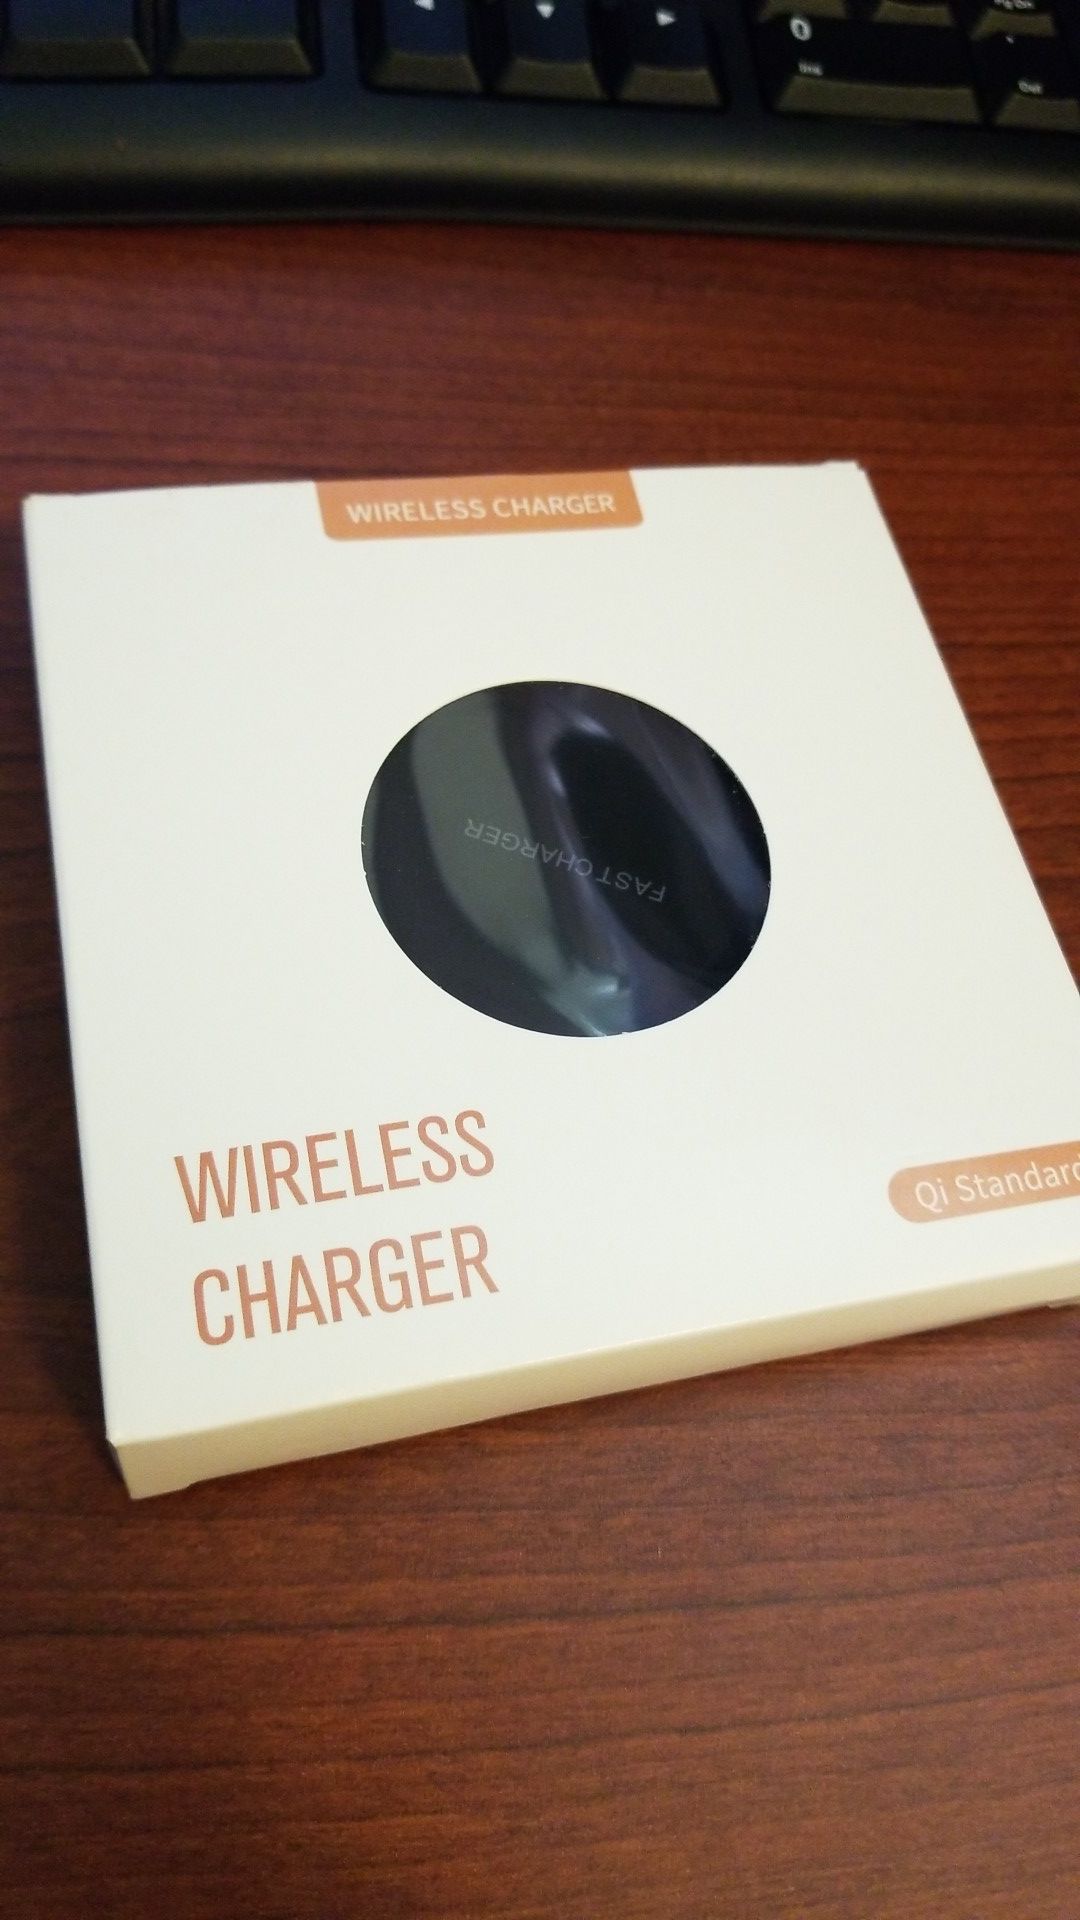 Wireless charger for smart phones